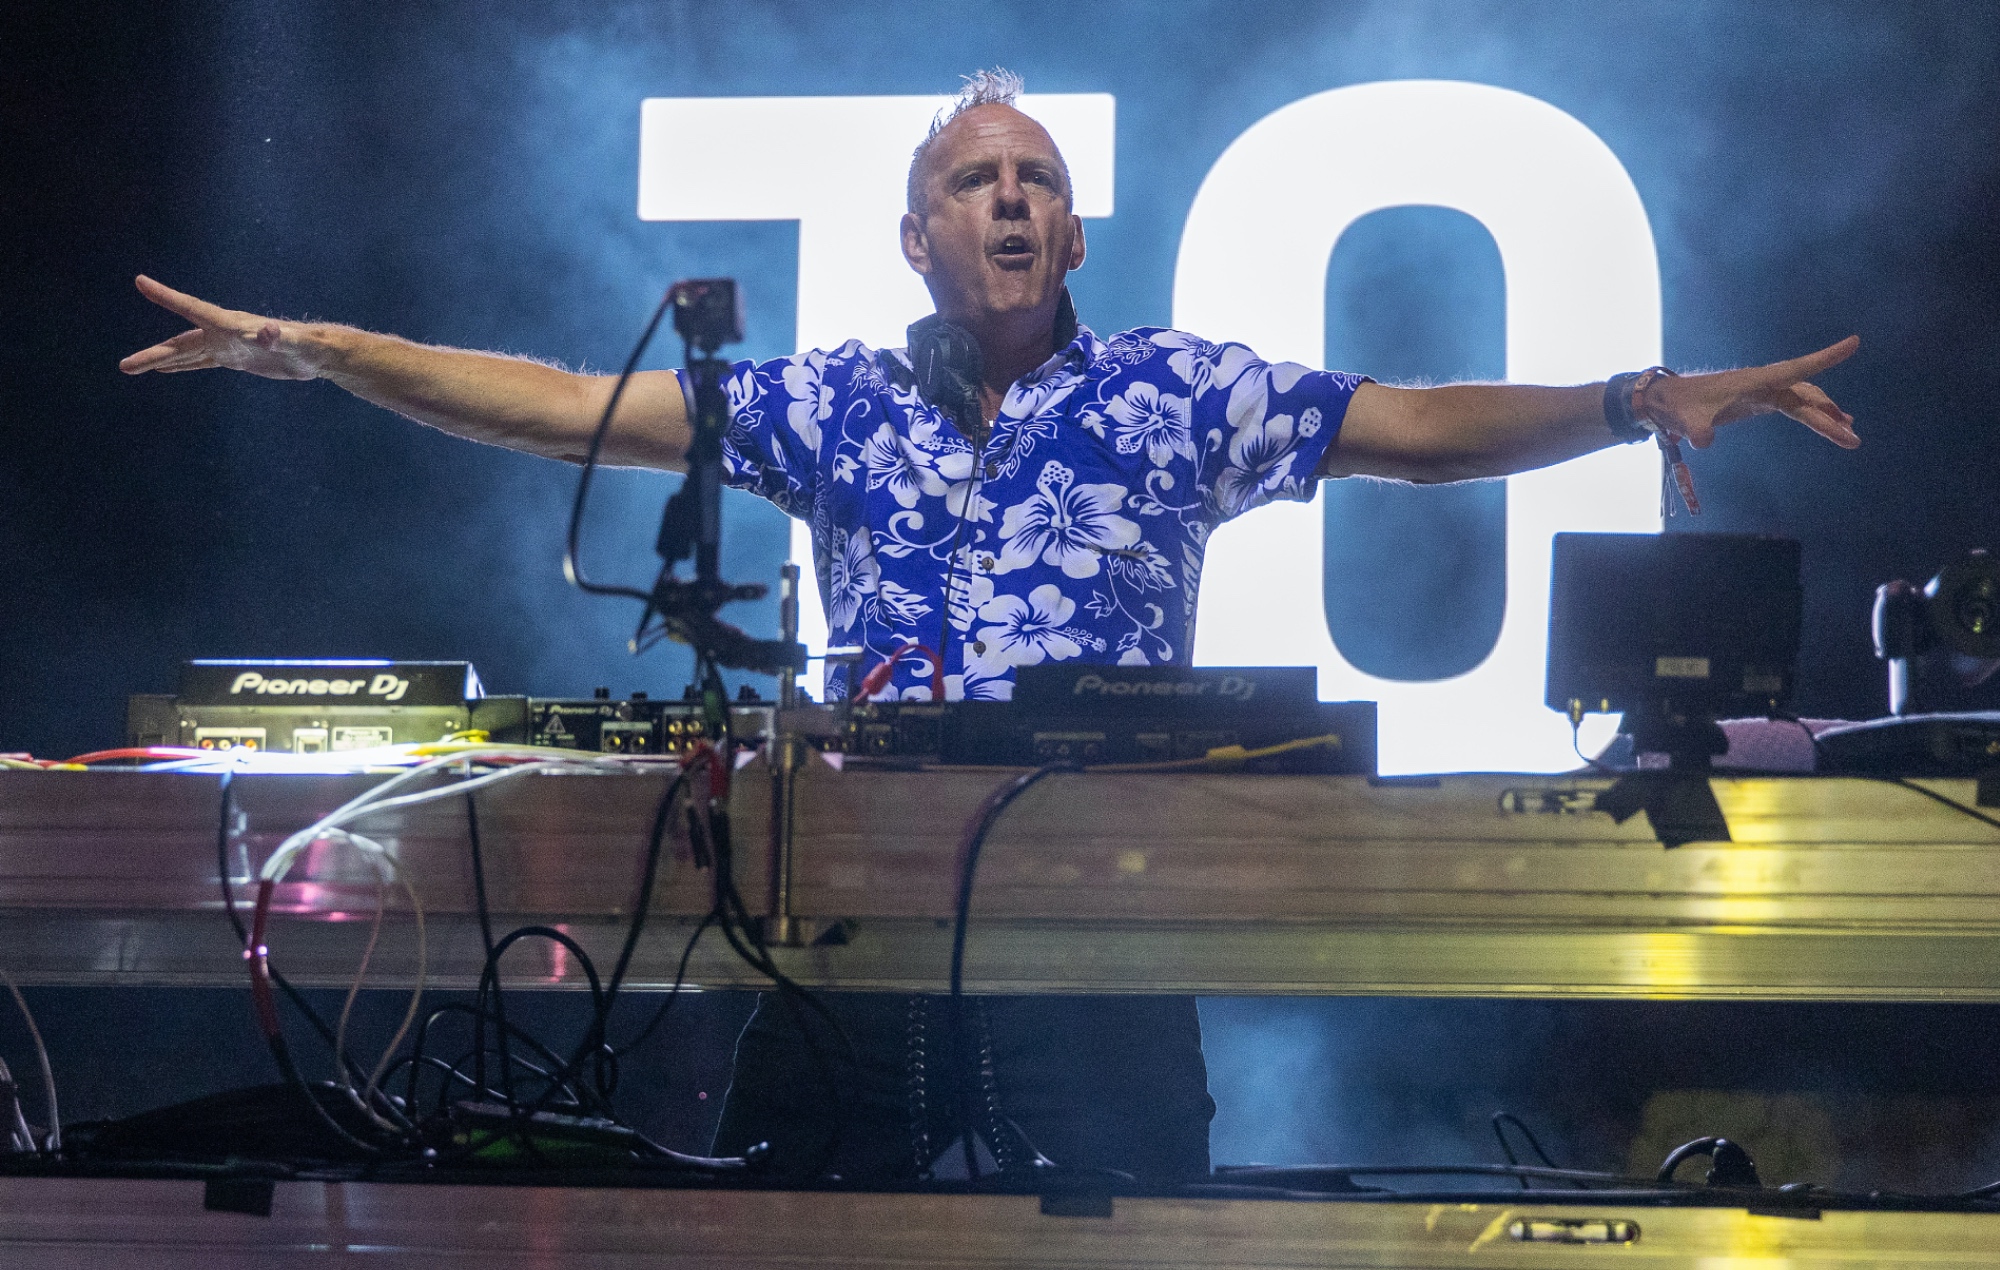 Fatboy Slim (aka Norman Cook) performing live on stage